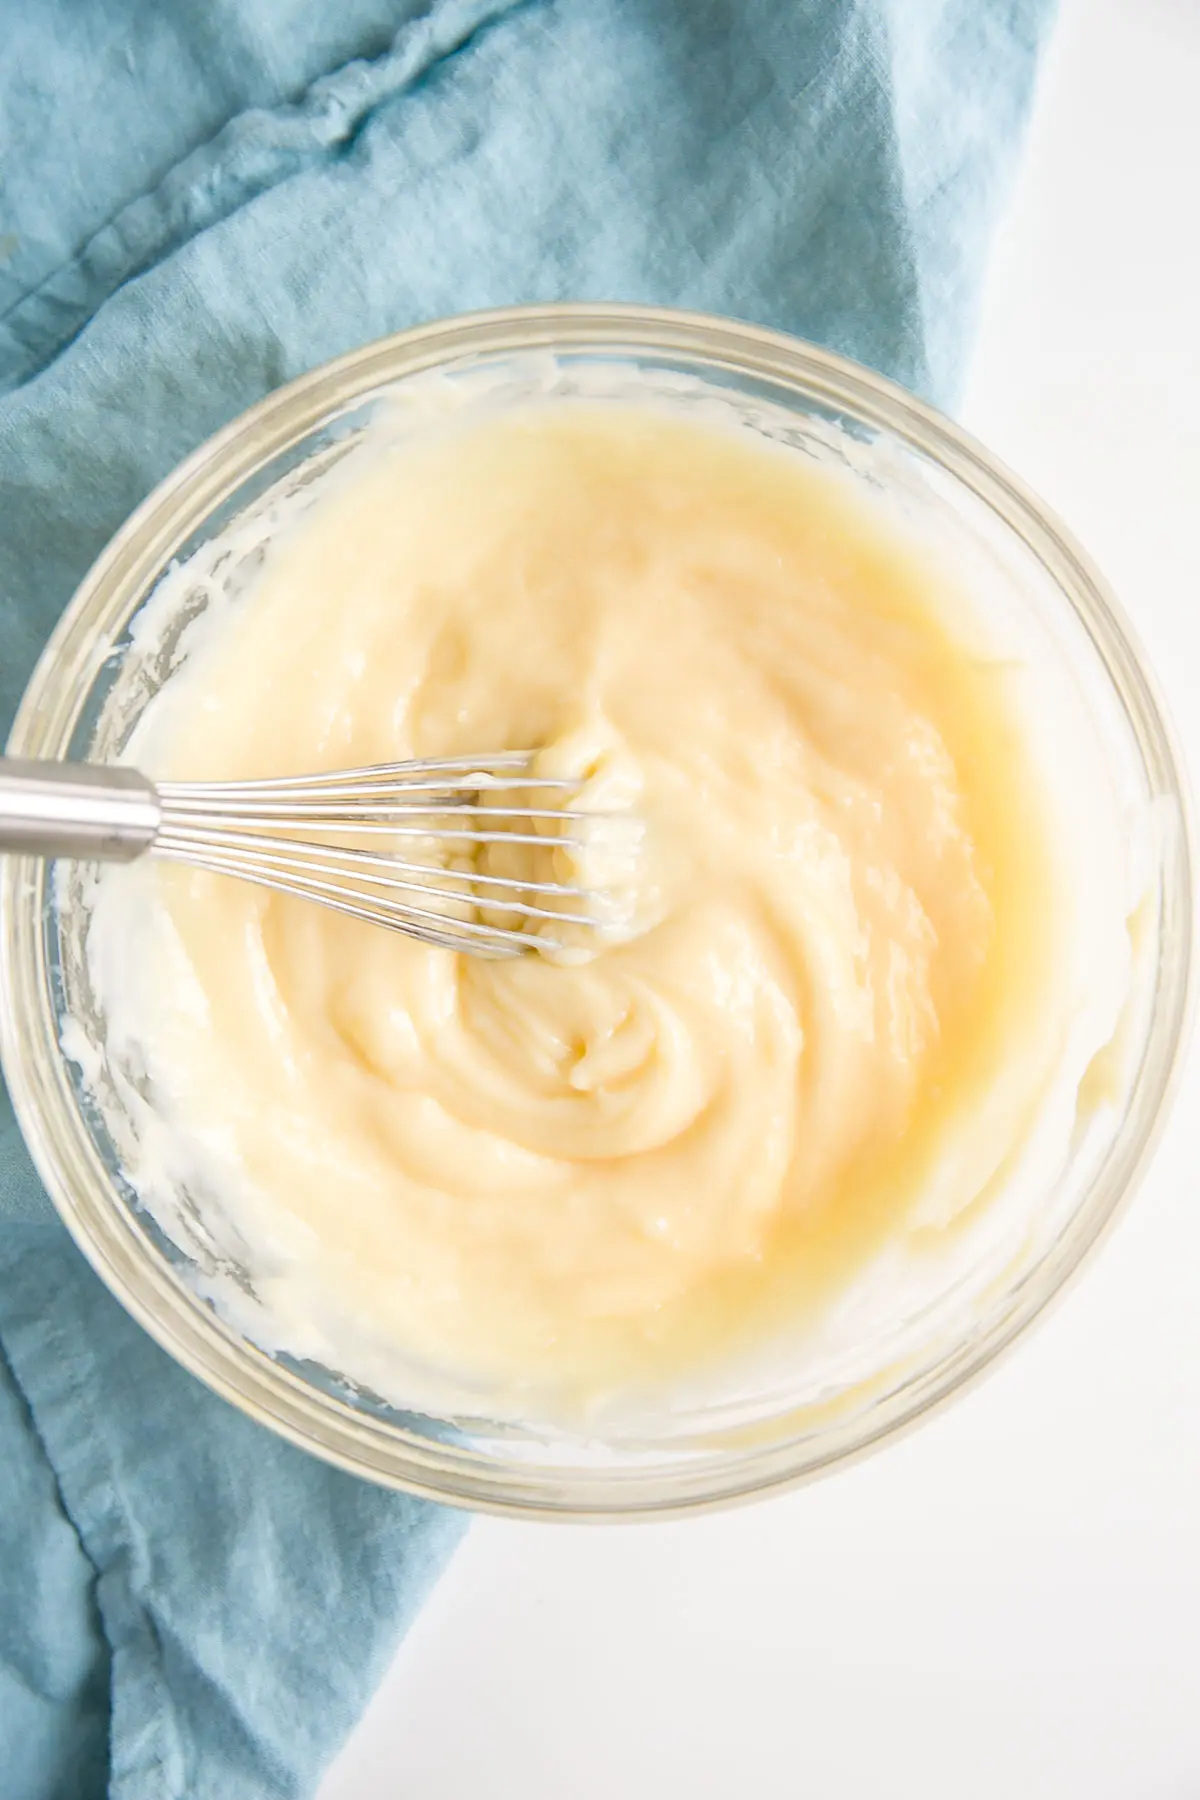 Perfectly smooth whisked pastry cream.